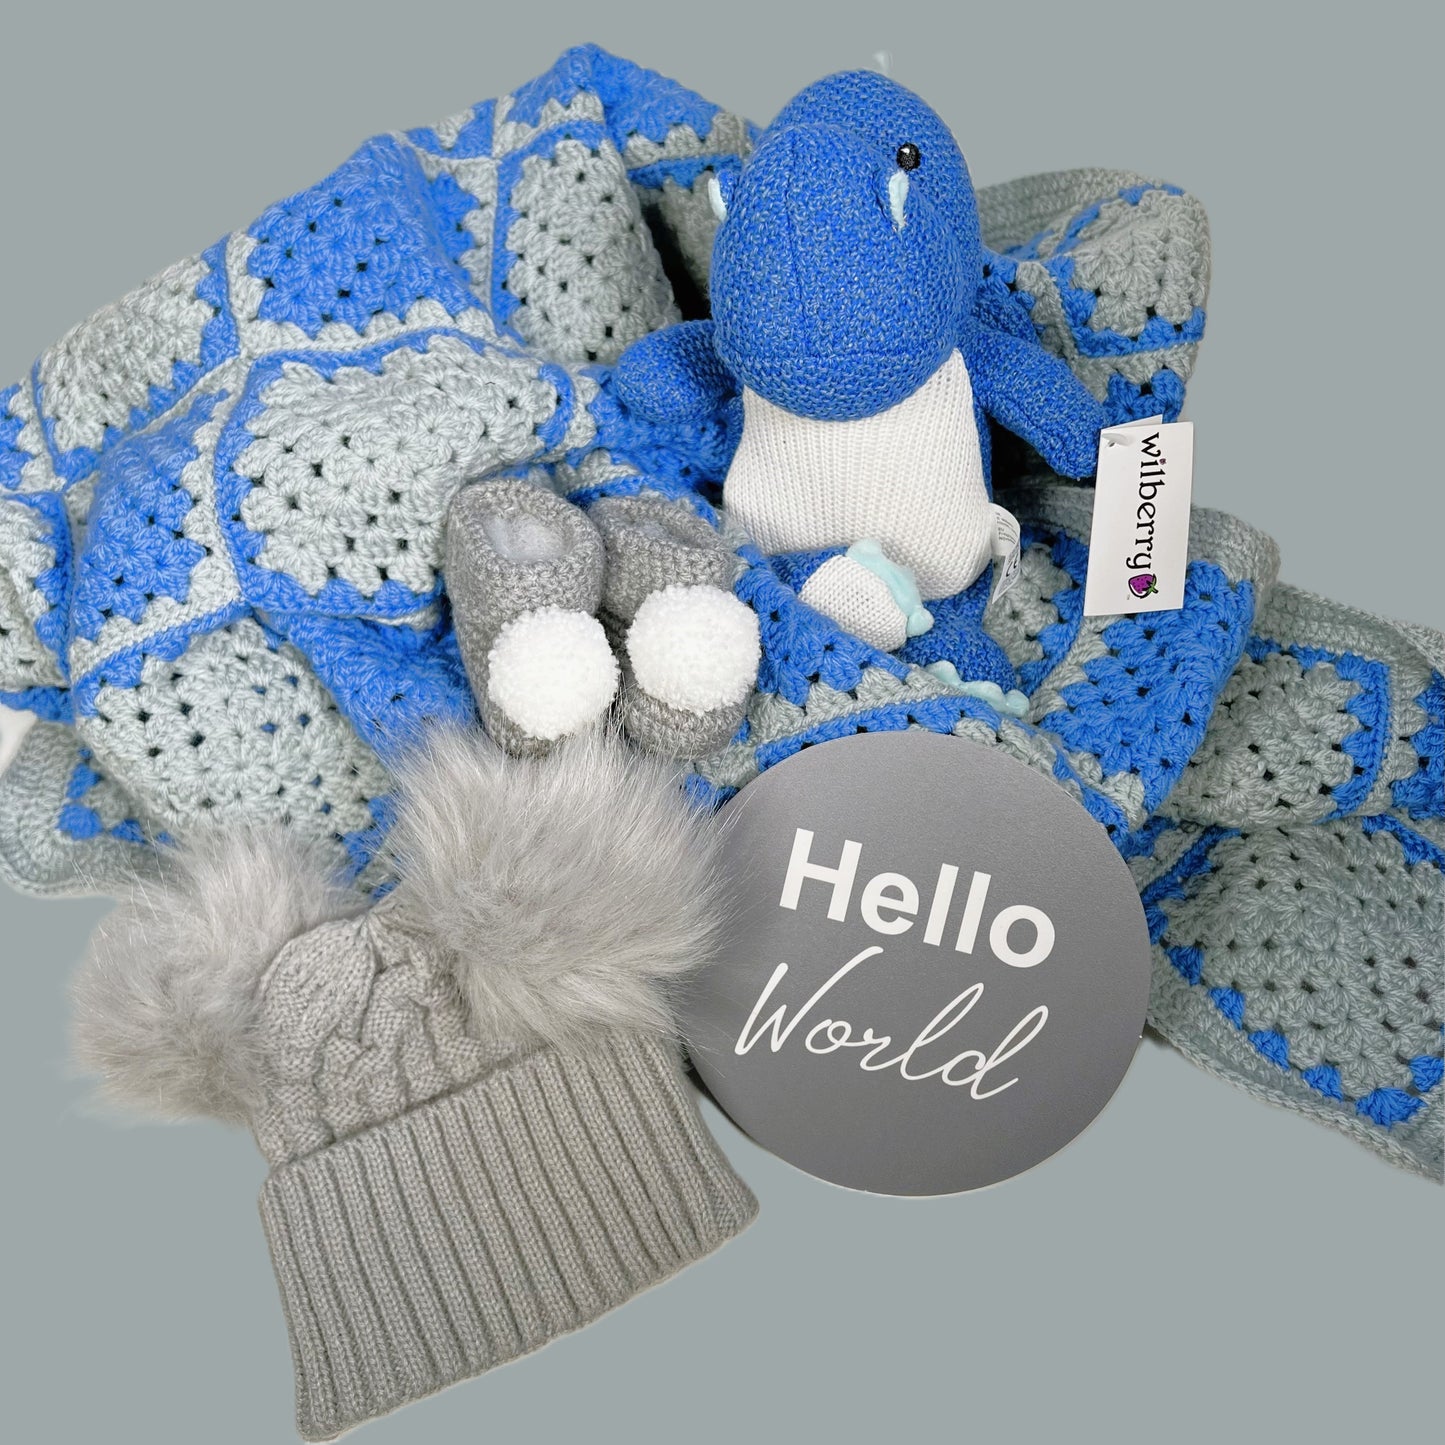 Grey and blue granny square baby boy crocheted baby blanket with a pair of grey baby booties with pompoms, a grey baby pompom hat, a "Hello World" baby photography plaque.